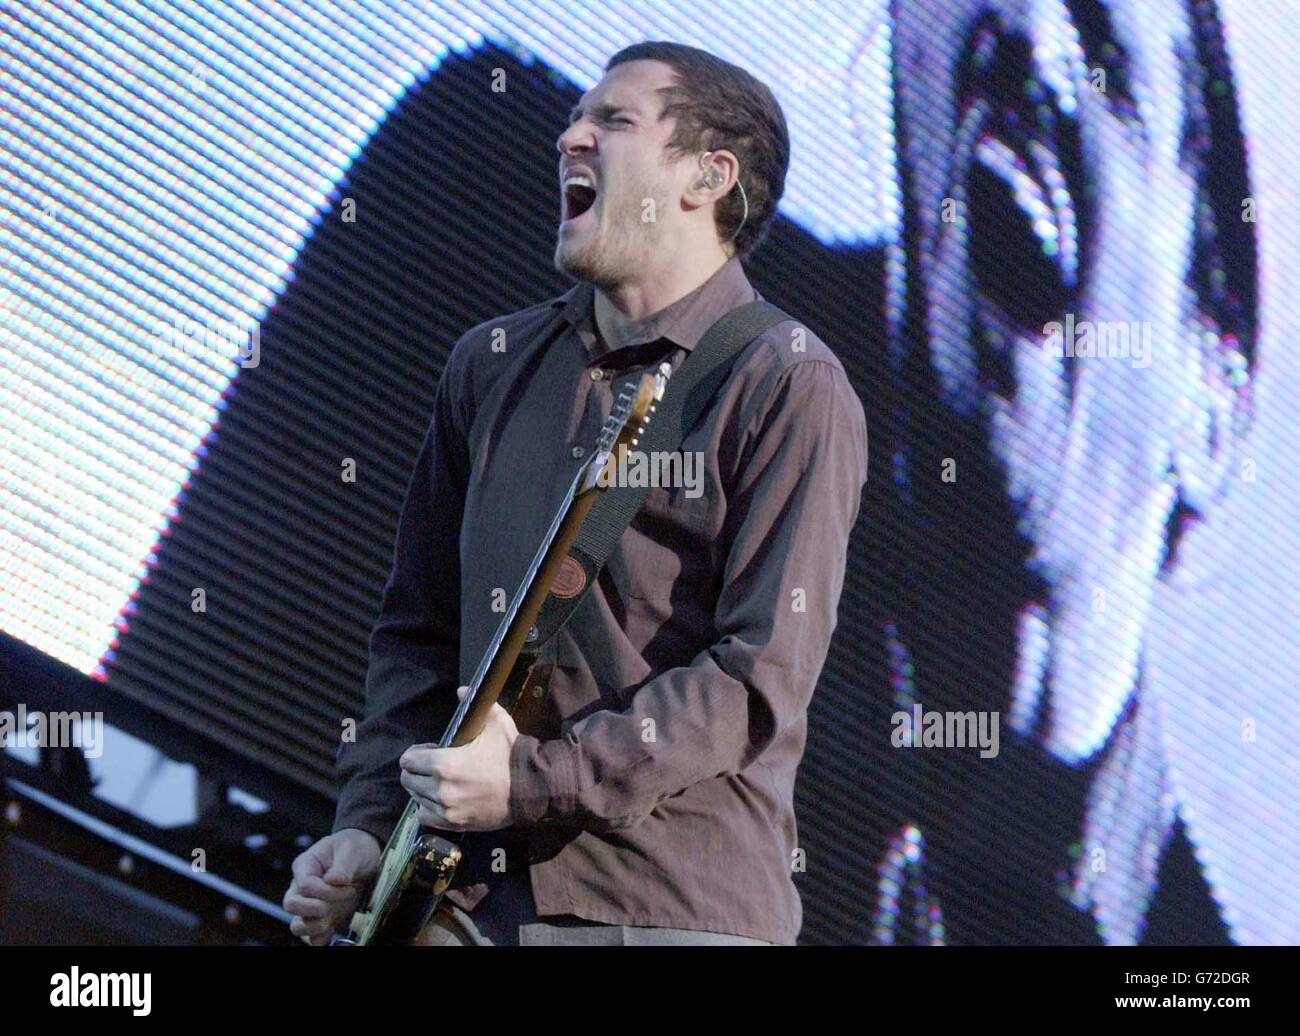 John Frusciante from The Red Hot Chili Peppers performing onstage at Hyde Park in central London. Stock Photo